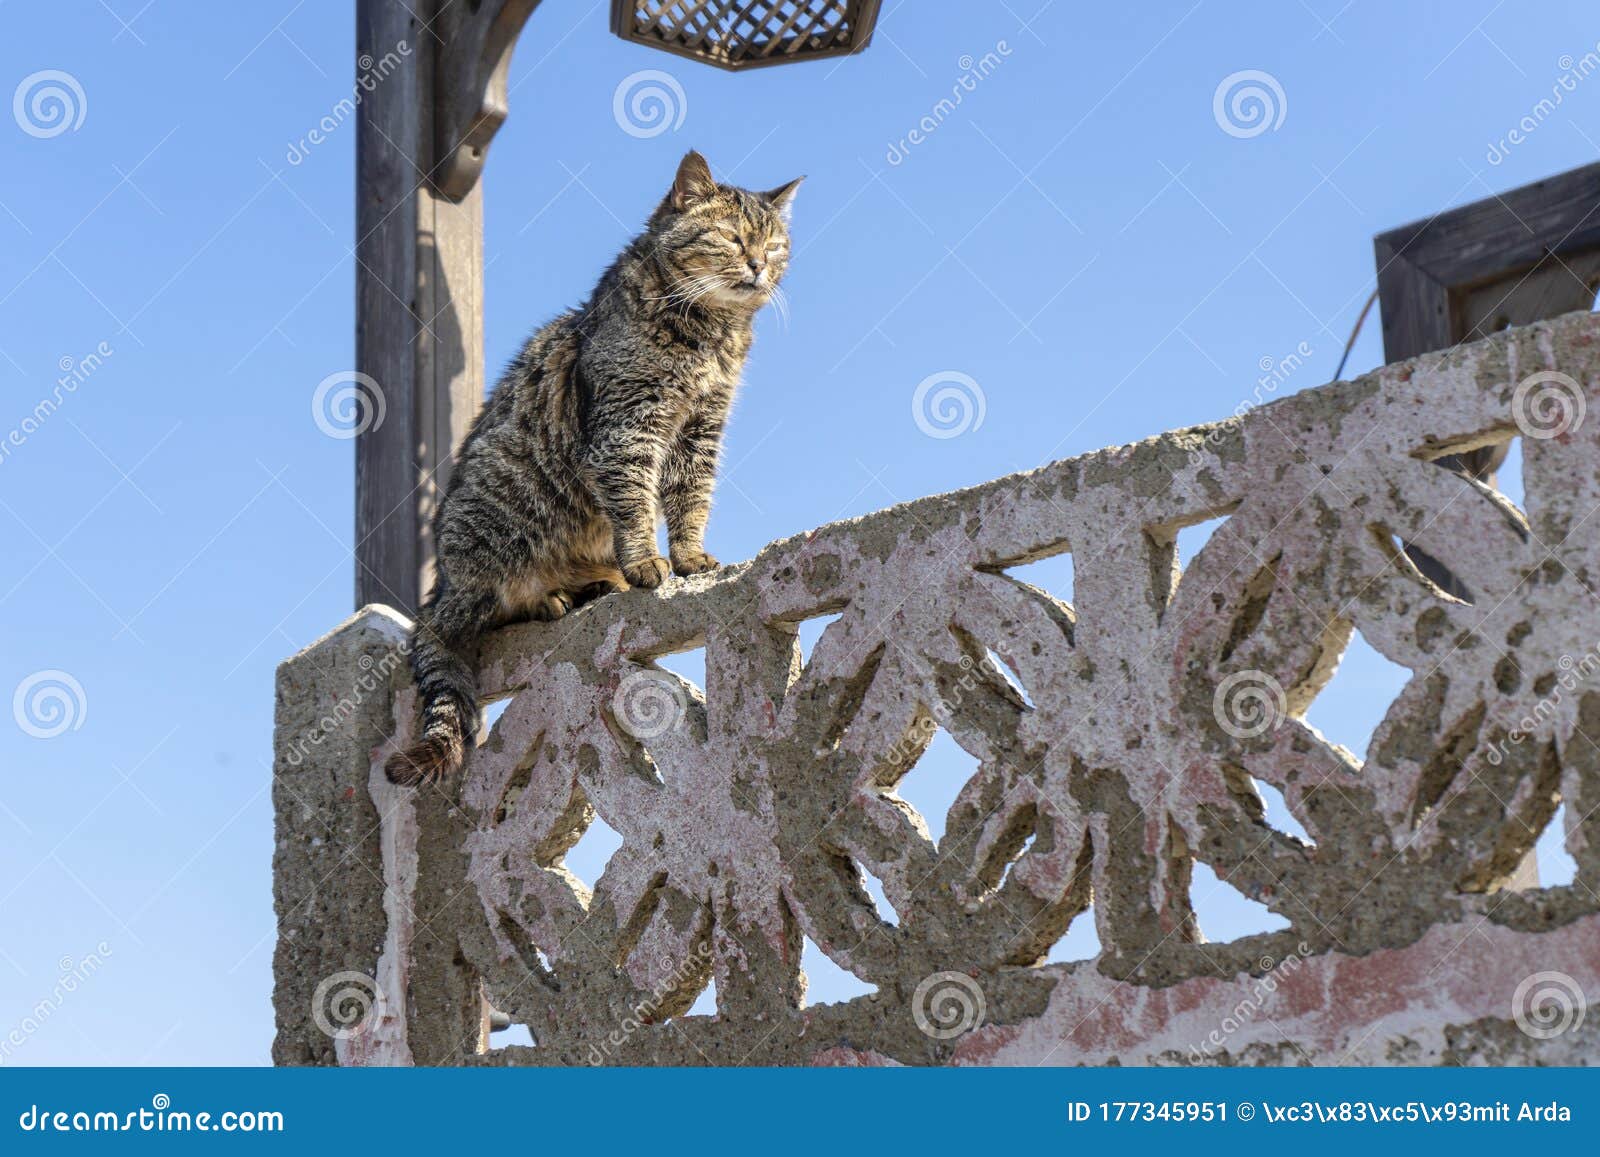 Cat with Angry face stock photo. Image of small, animal - 141442568